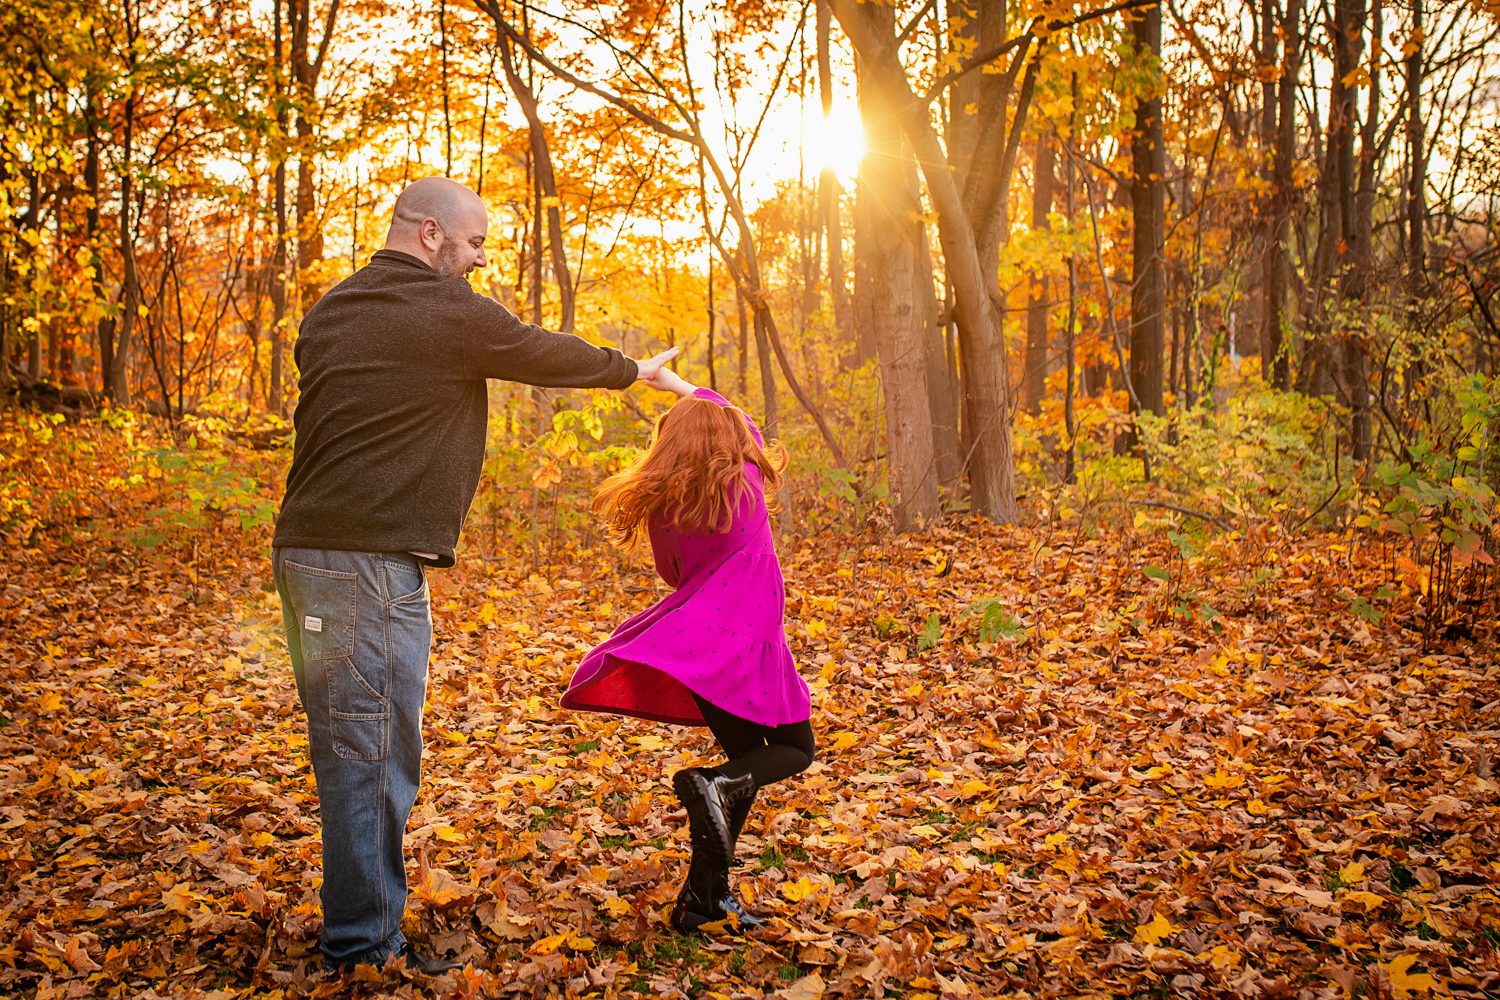 family photographer in rochester ny captures dad dancing with his daughter